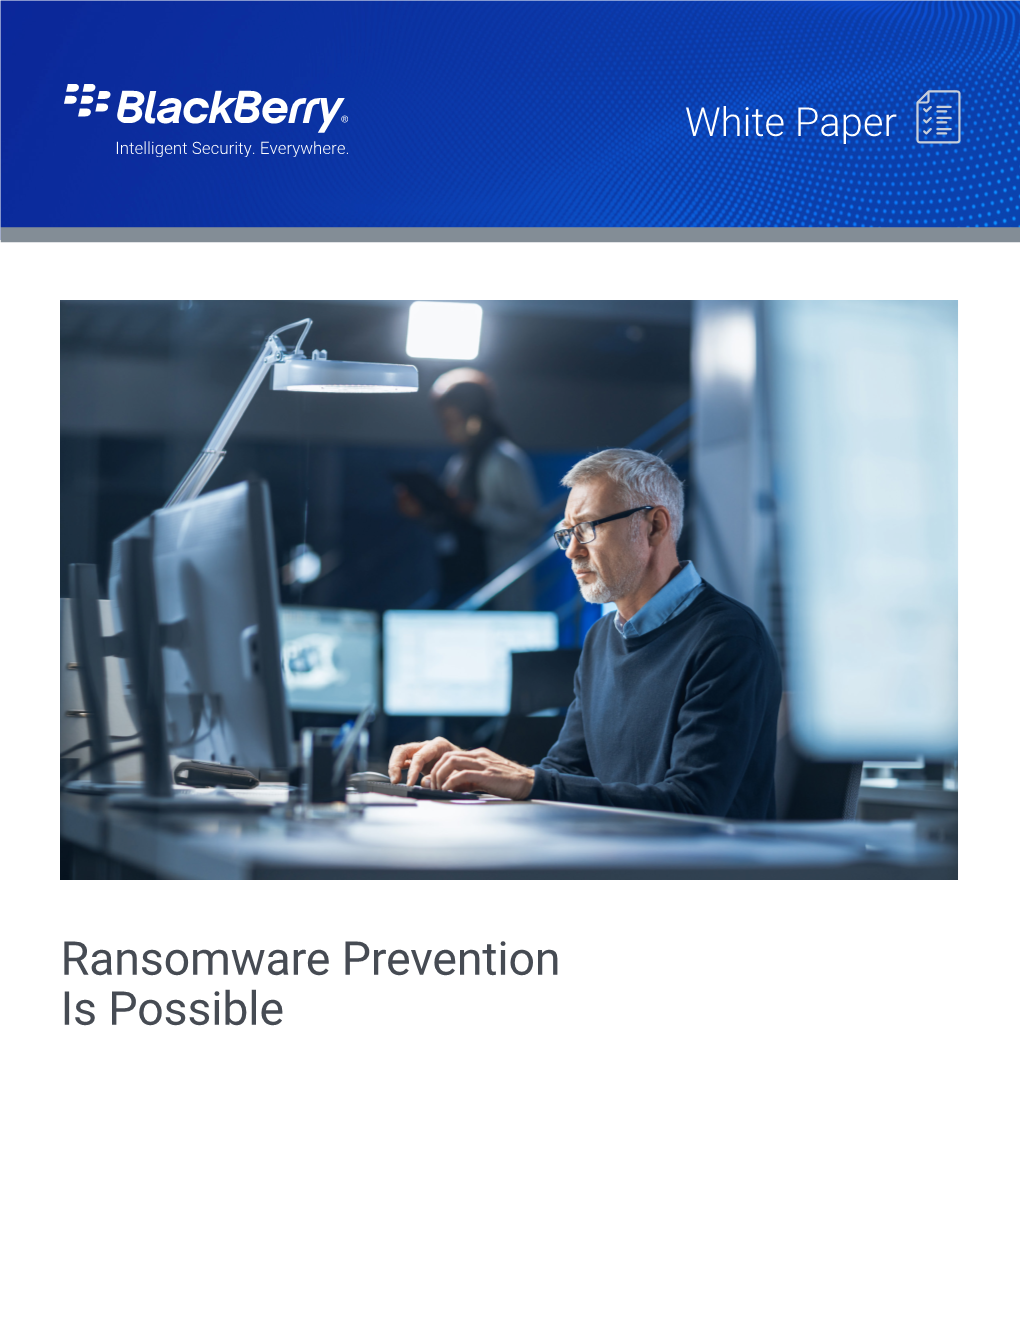 Ransomware Prevention Is Possible Introduction Ransomware Is a Form of Malware That Encrypts Files to Prevent Victims from Accessing Their Systems and Data